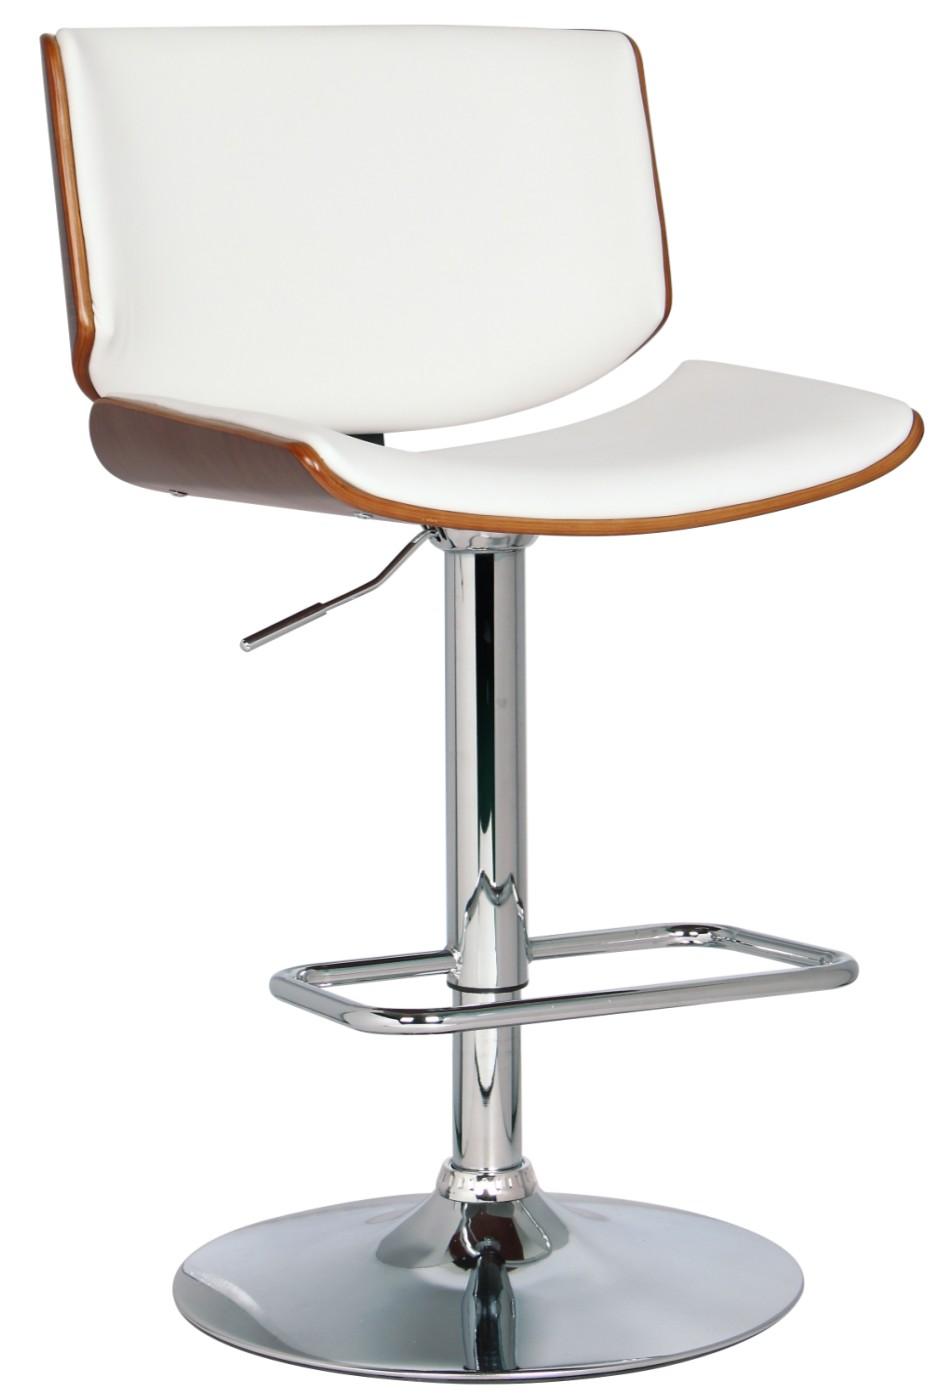 Counter height. -Sturdy 45cm round base in chrome finish - 360 swivel seat.